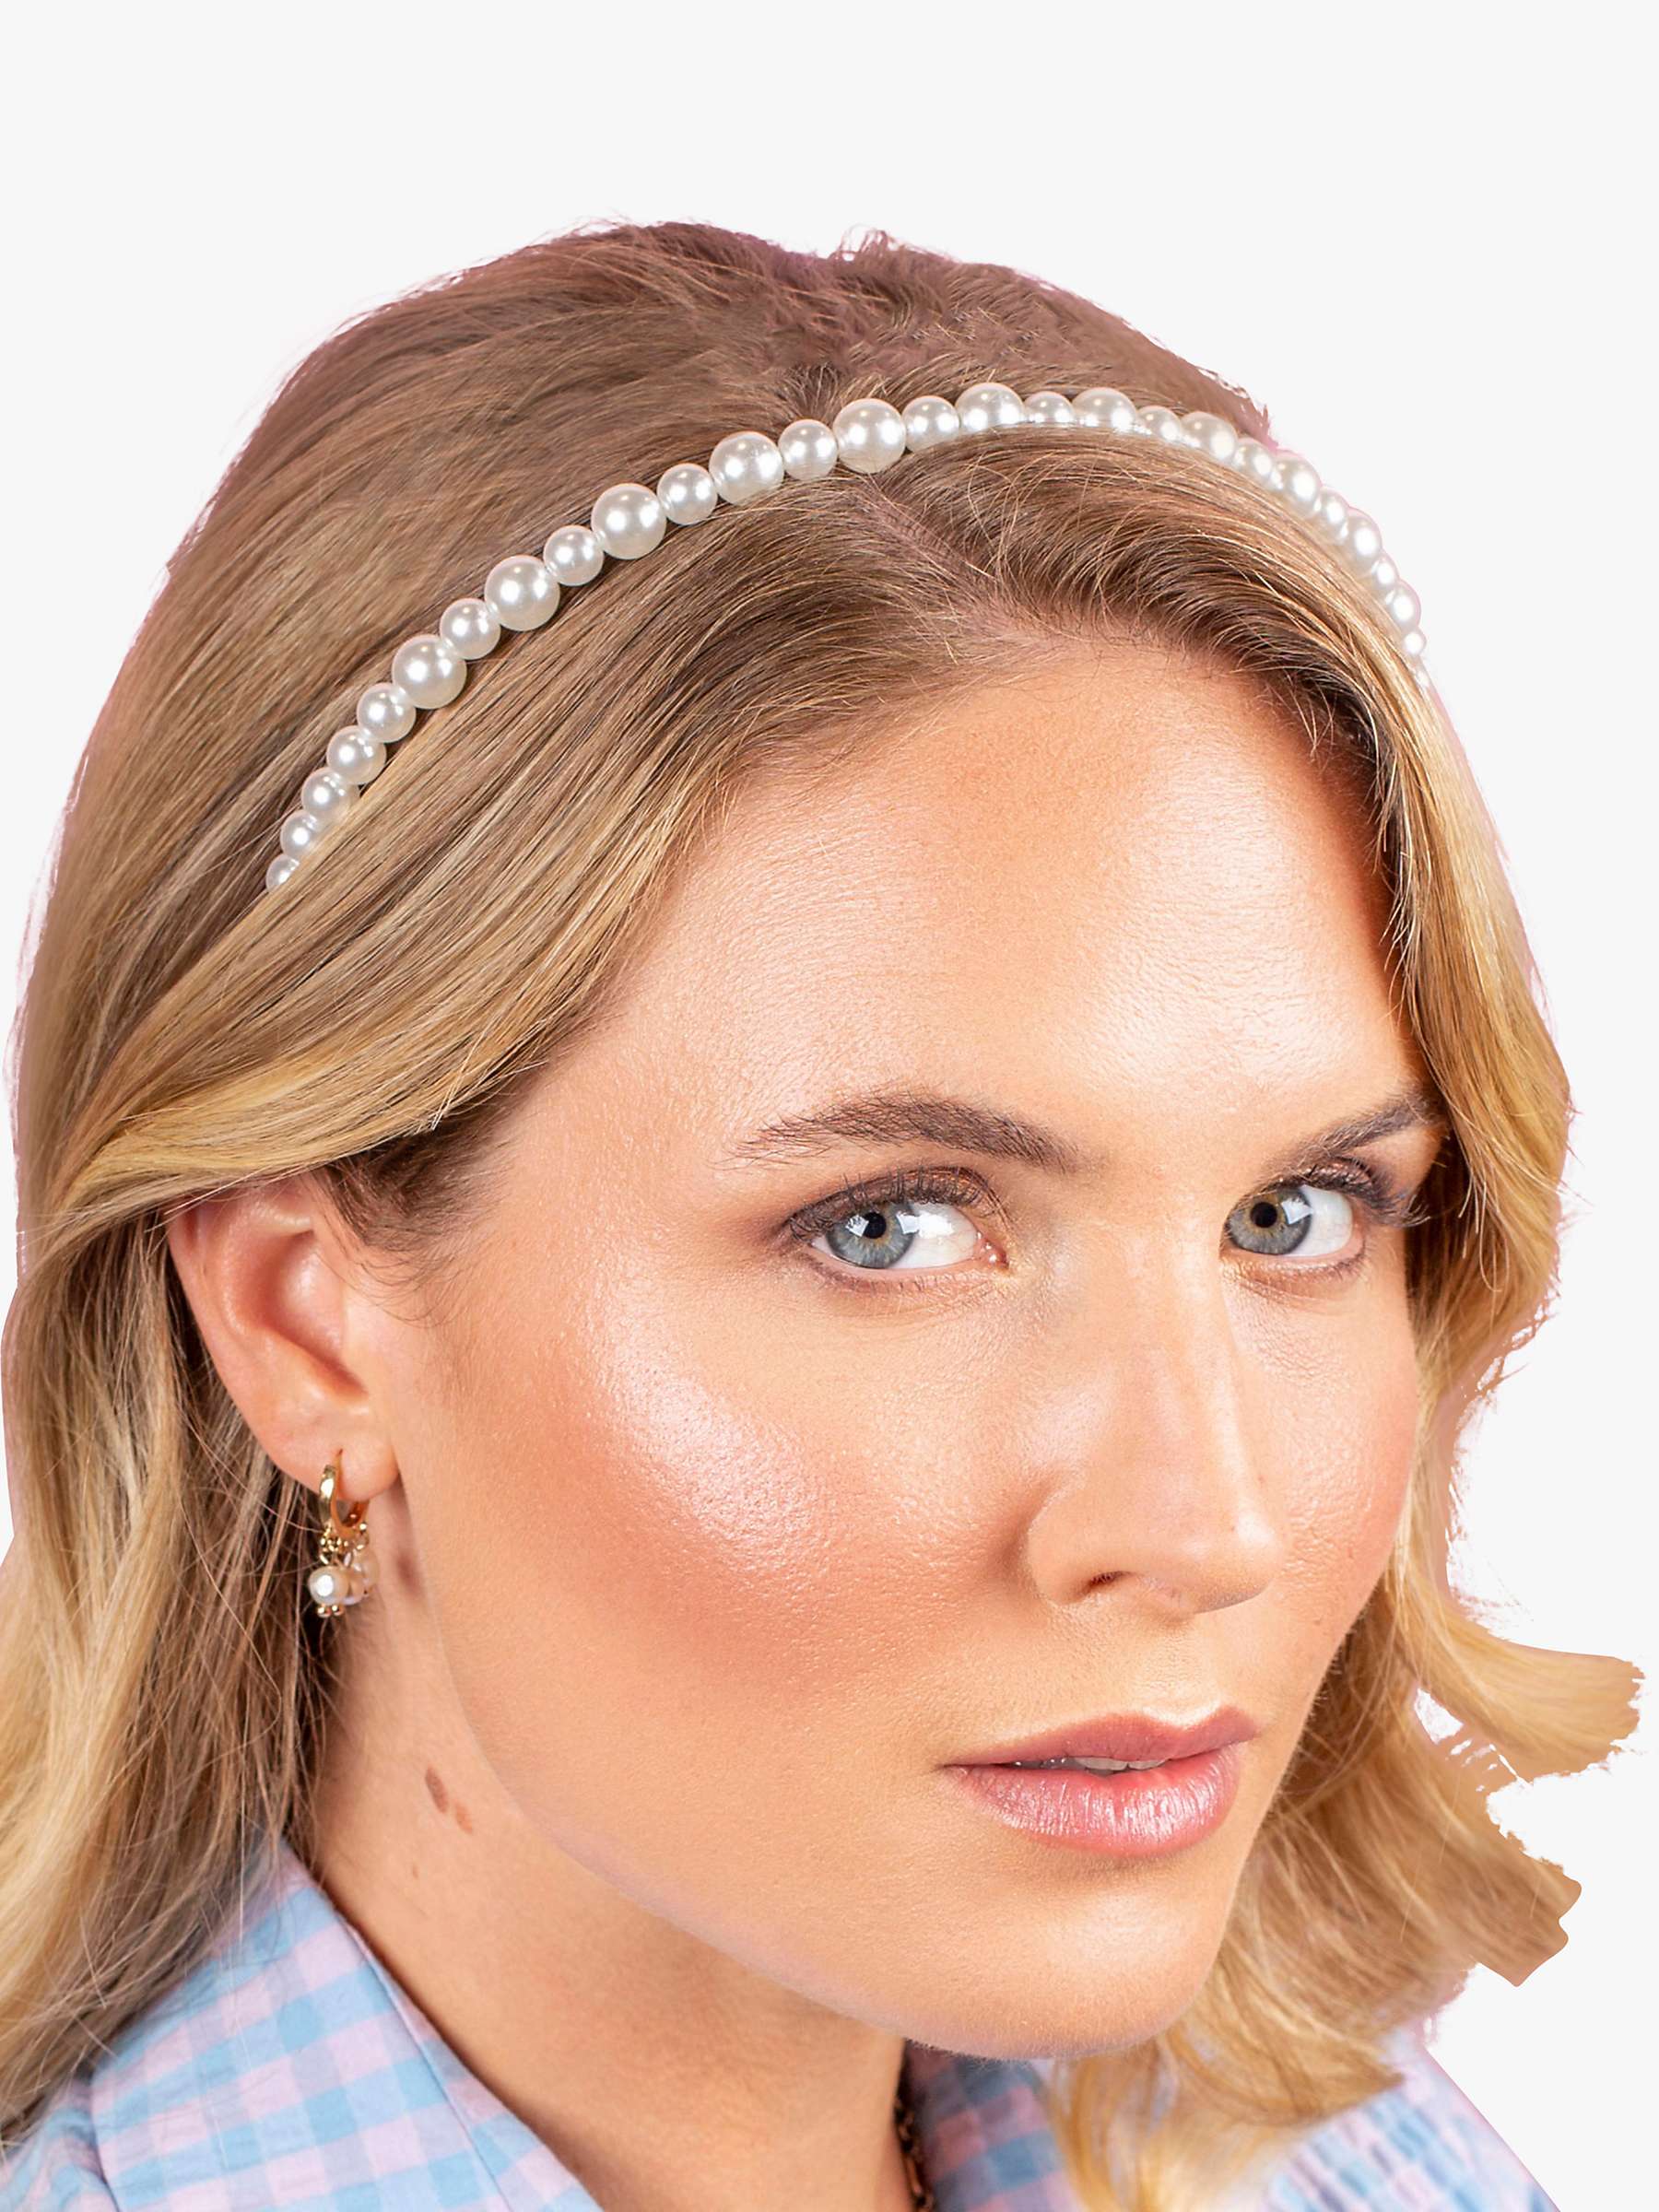 Buy Bloom & Bay Cherry Pearl & Crystal Headband Set, Silver/White Online at johnlewis.com